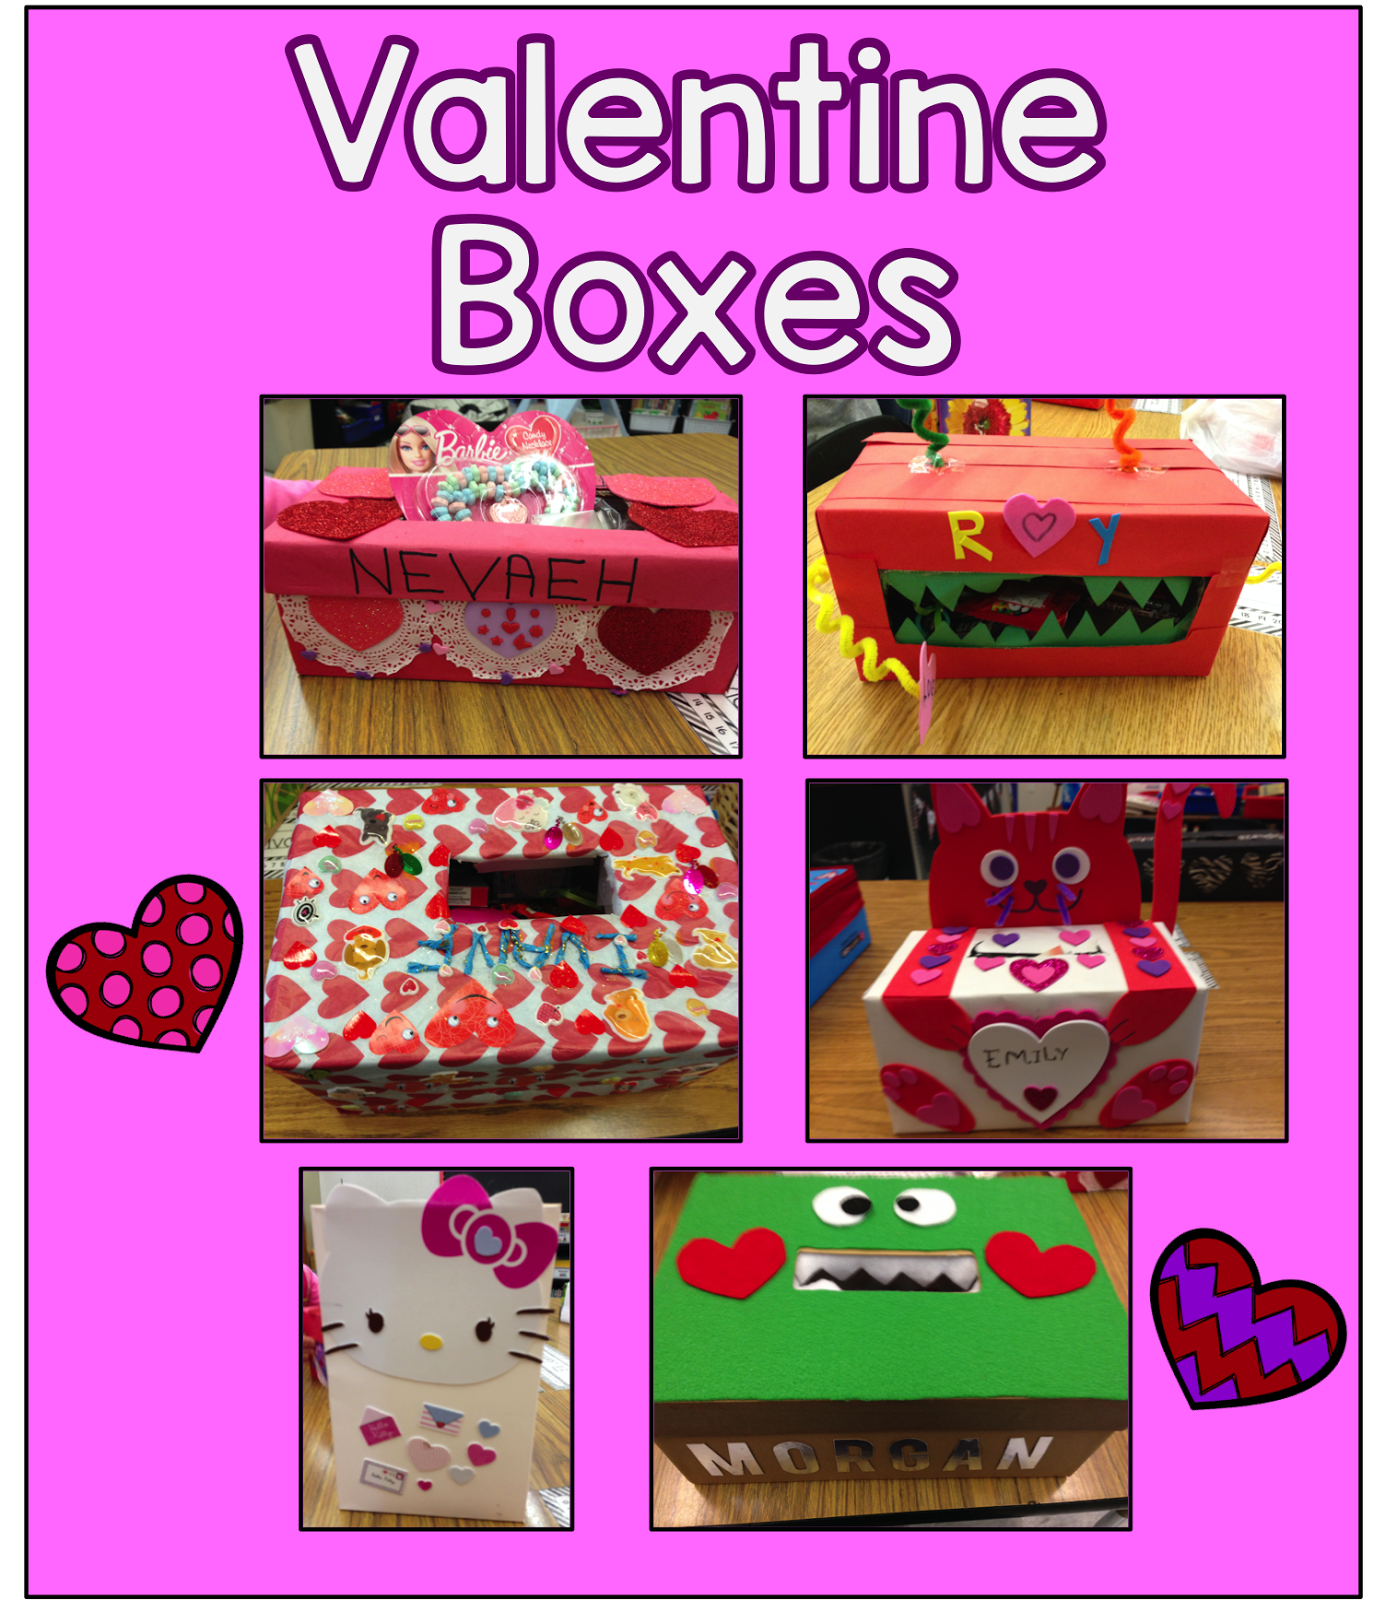 Valentine Box Project. Let your students create a Valentines box at home with their family.  Use this Take home letter to explain the project and see just how creative your students can be.